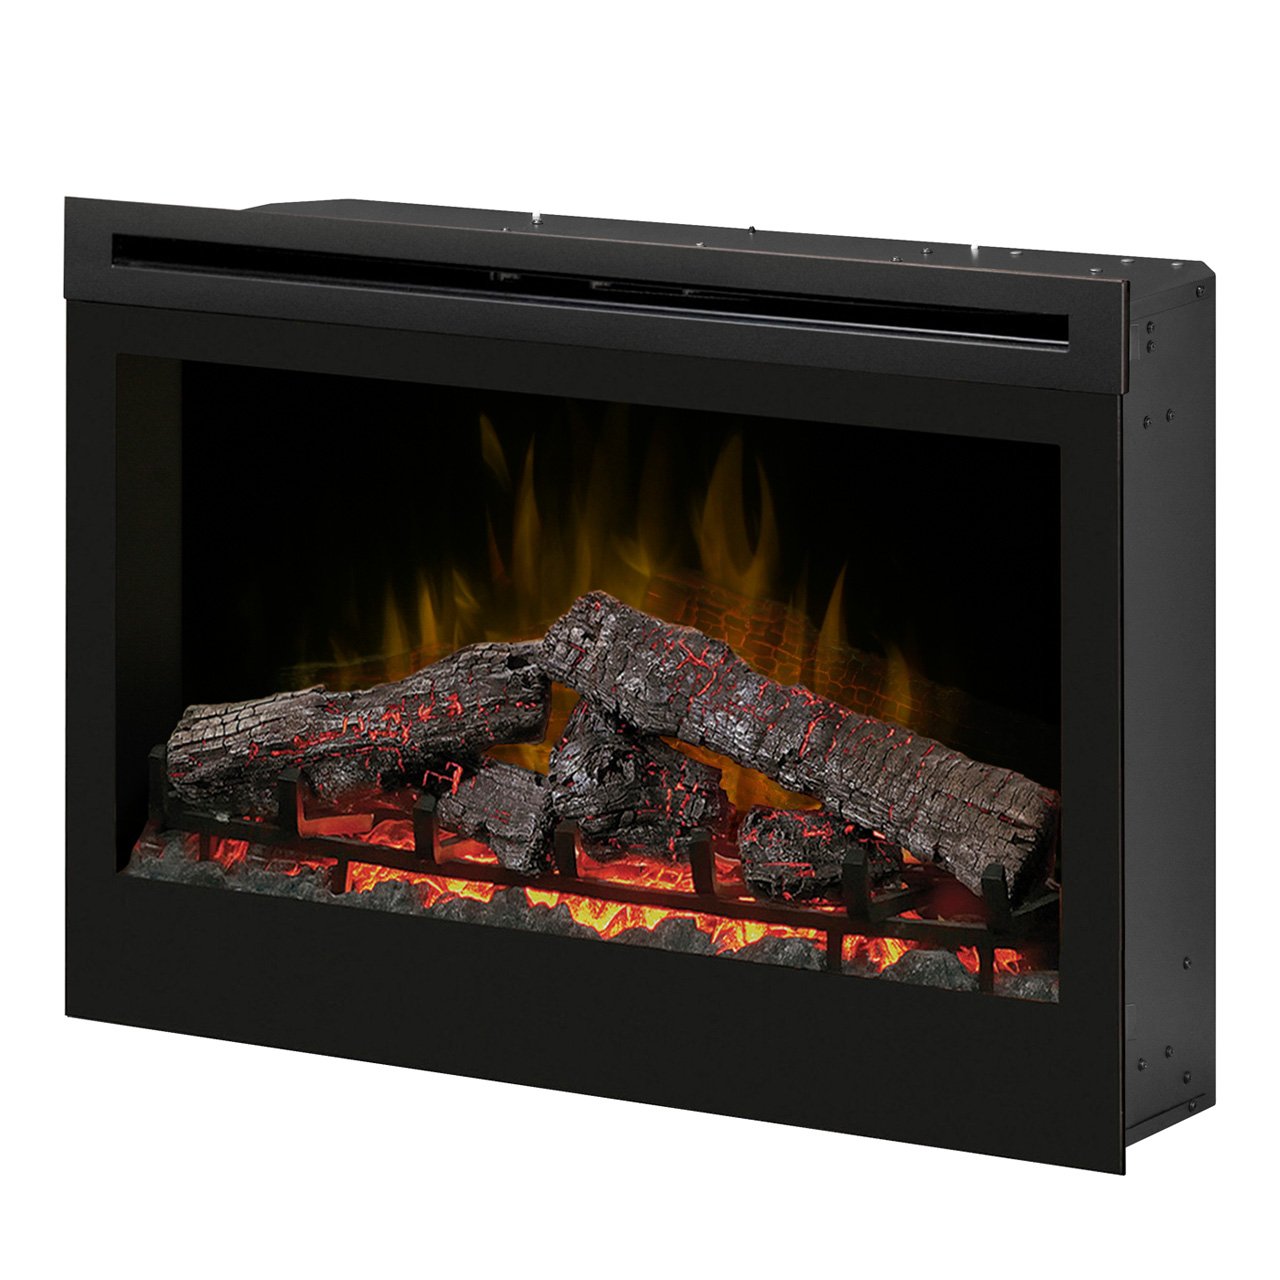 Embers Fireplace Inspirational Dimplex Df3033st 33 Inch Self Trimming Electric Fireplace Insert